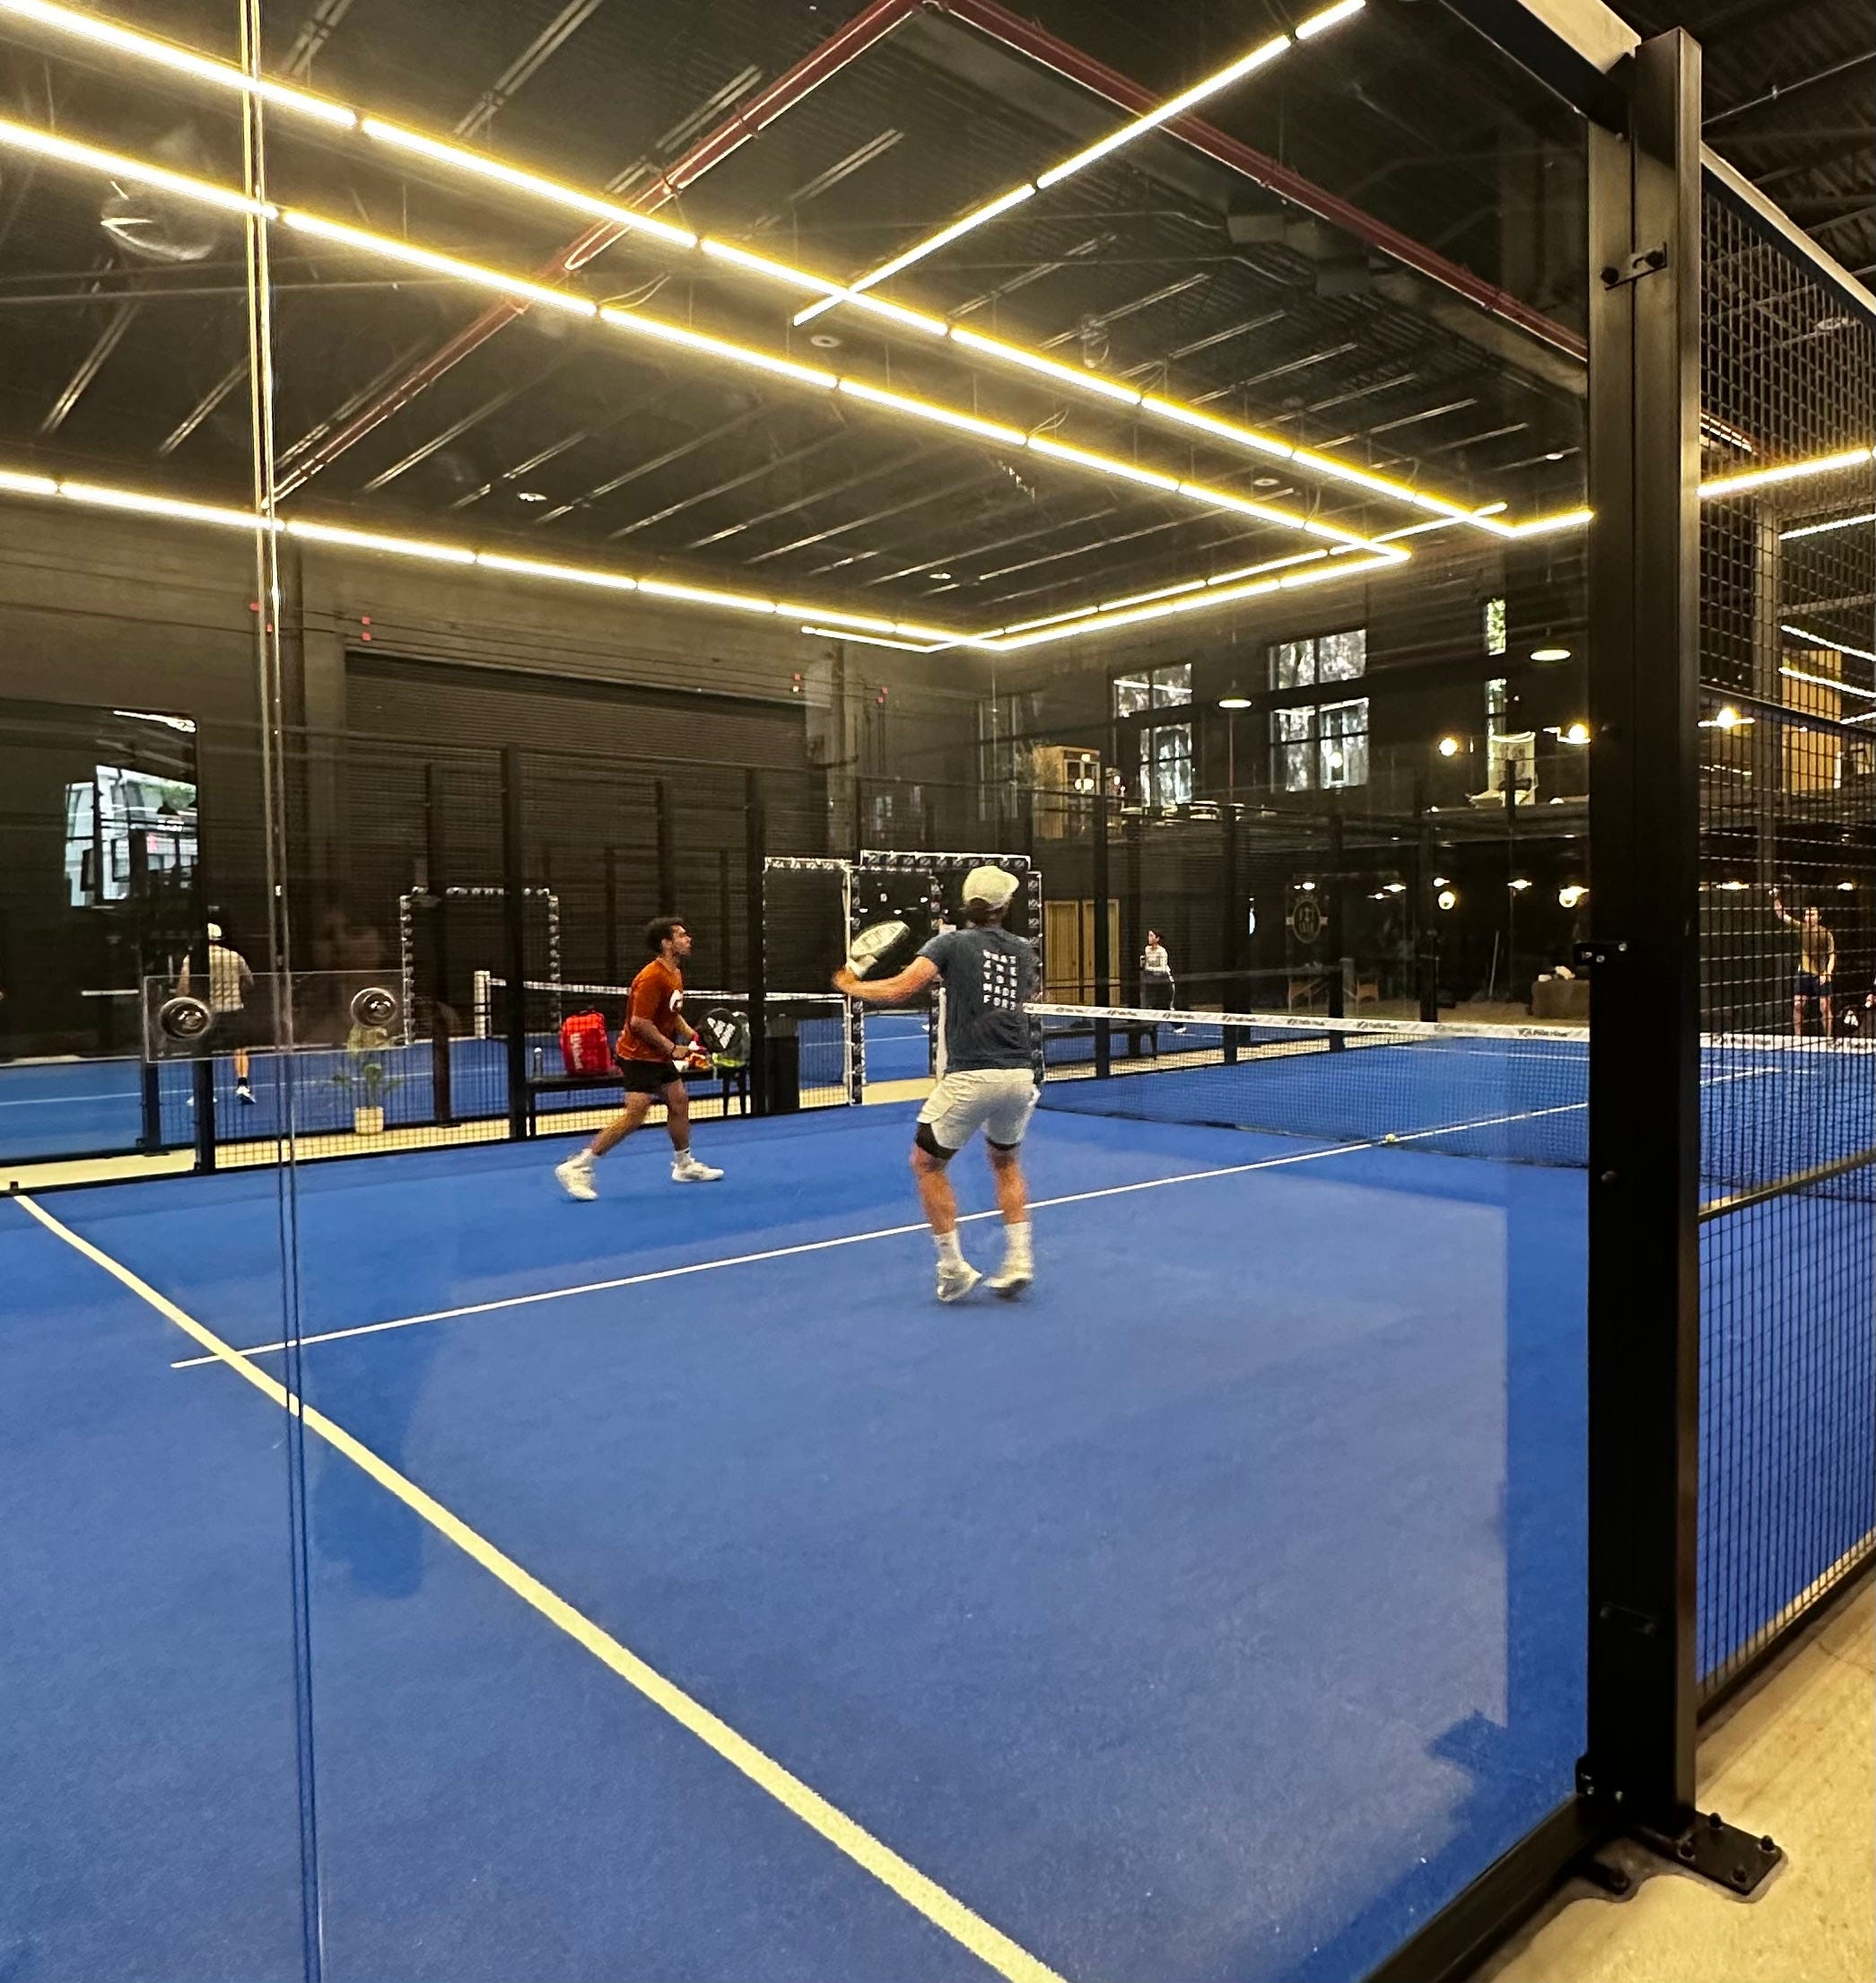 <p>Residential buildings and gated communities are installing private padel courts for tenants who live in million-dollar units. It's particularly popular among the international elite in Miami.</p><p>"There's a lot of high-net-worth individuals that are playing the sport," real-estate agent Marko Gojanovic previously told BI. "Miami's full of South Americans and Europeans that have been playing padel since they were young. So it's like a sport that's reintroduced to them. All of a sudden, it became super popular."</p>